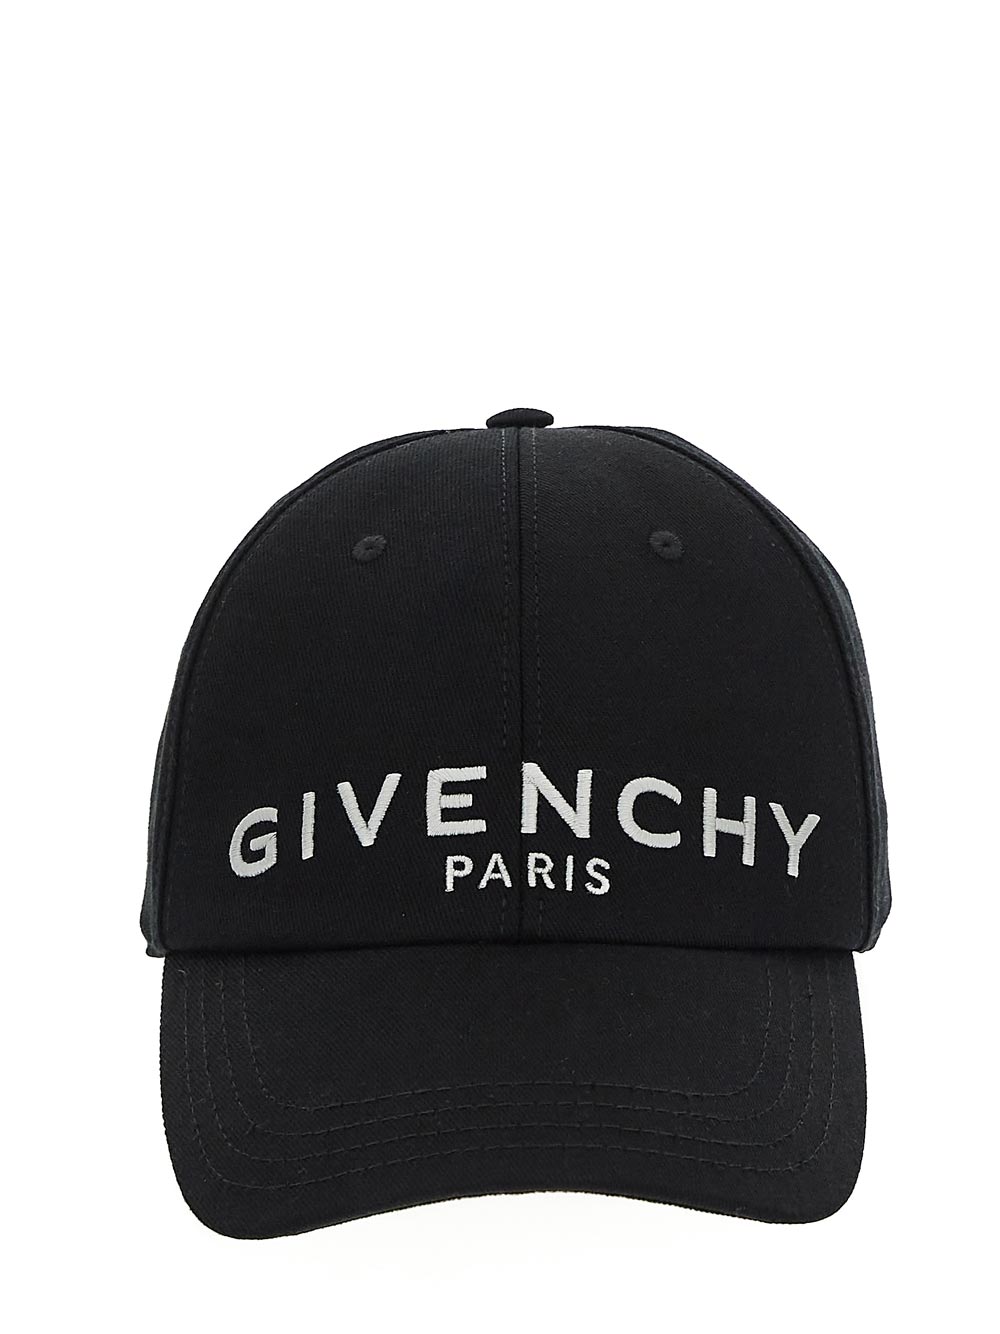 Givenchy Paris Embroidered Cap